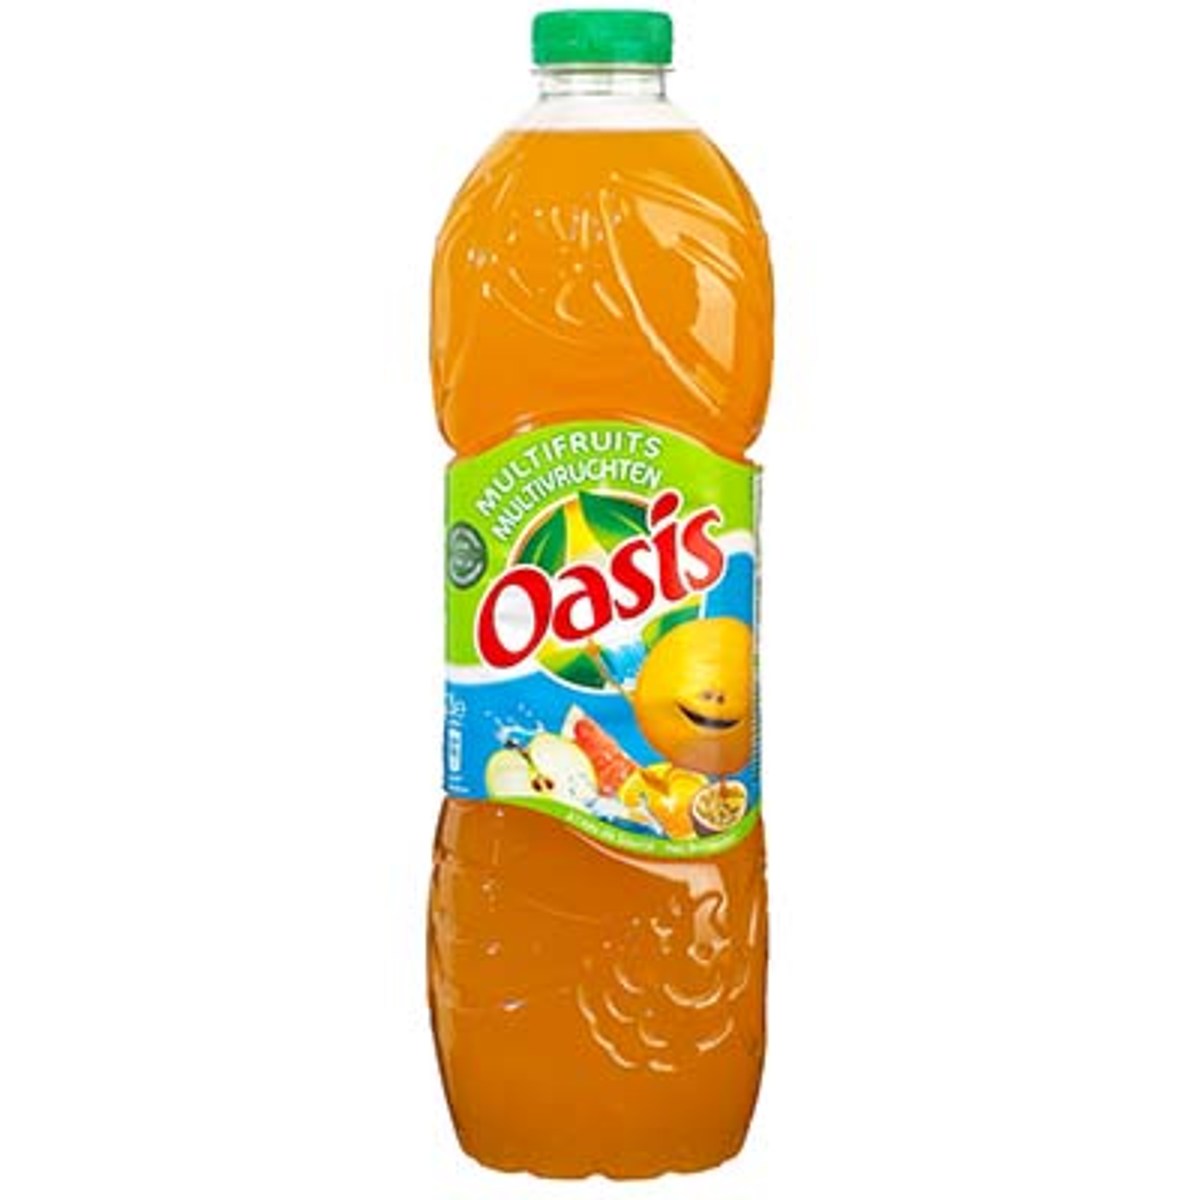 Oasis Multifruits 2litres Boutique Cabf